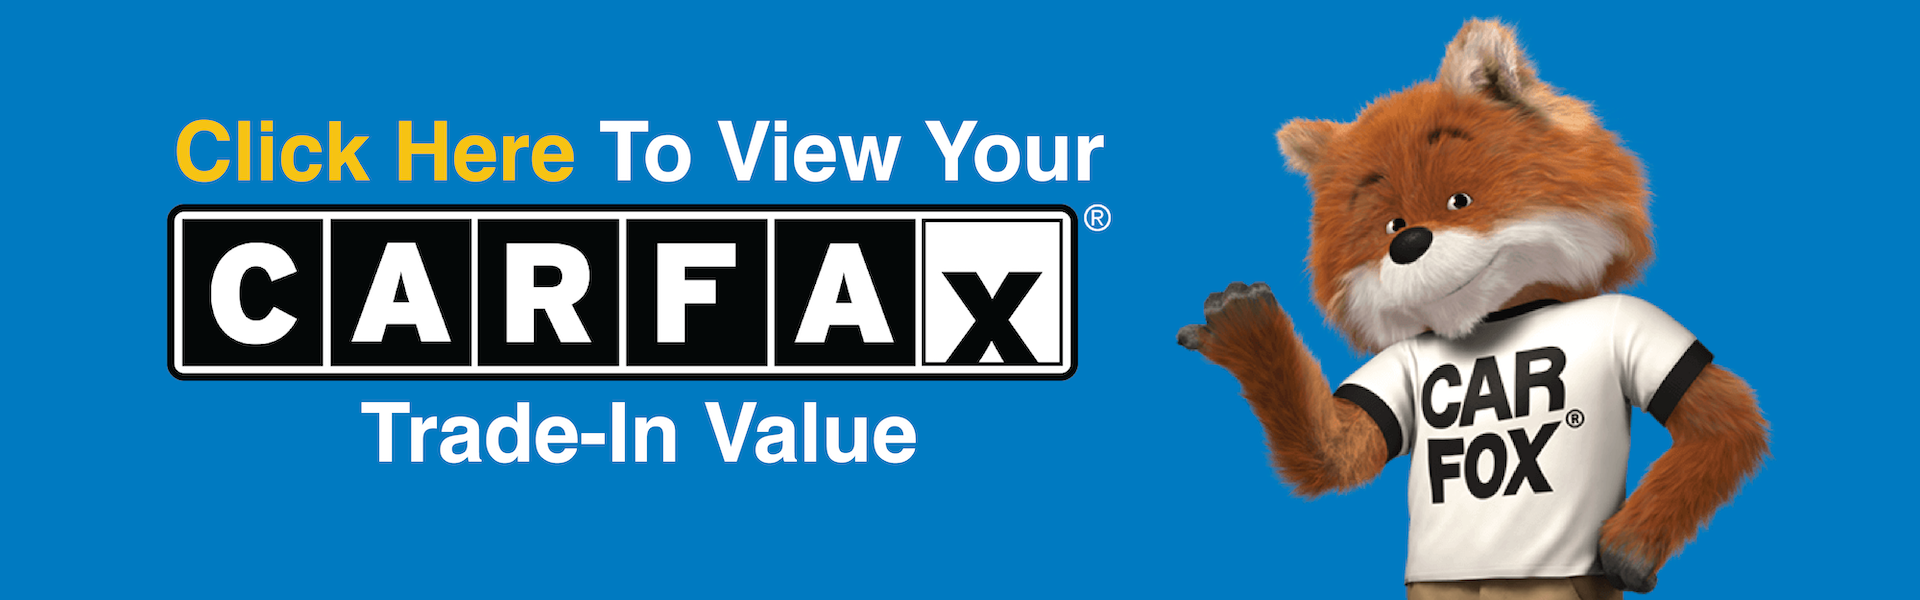 Carfax Trade-in Value